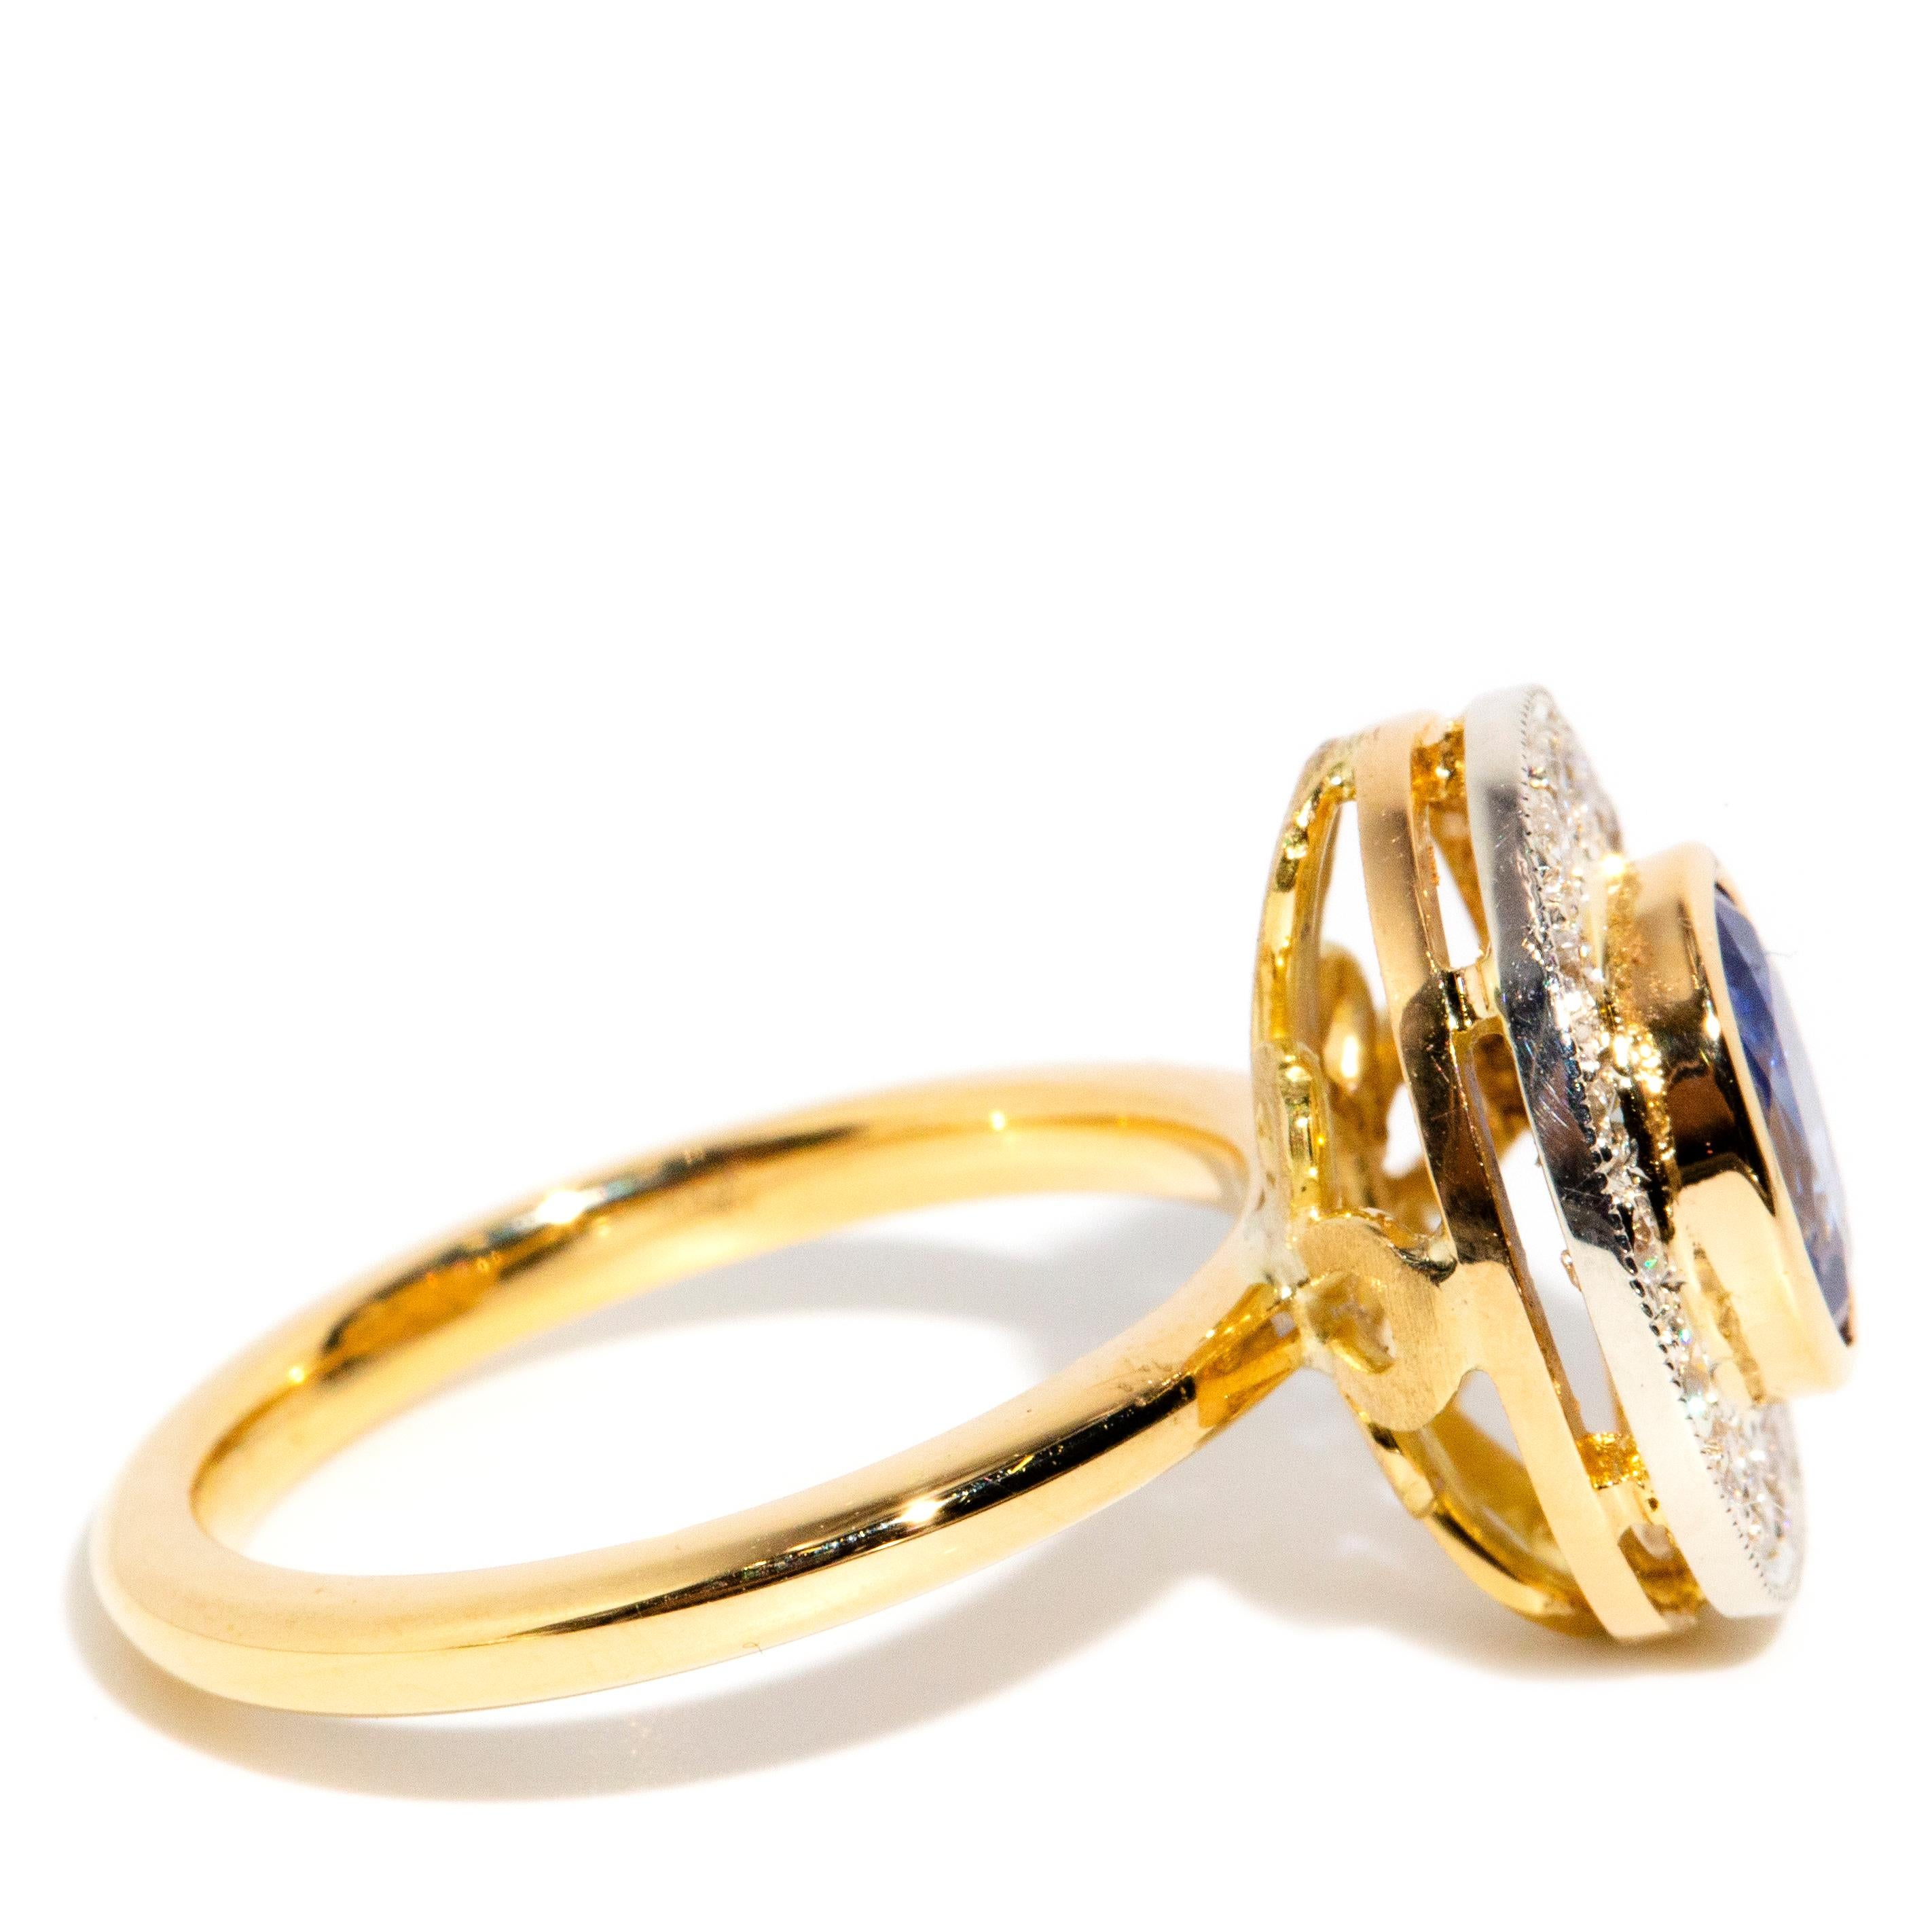 Women's or Men's Reinvented Vintage Circa 1980s Sapphire & Diamond Halo Ring 18 Carat Yellow Gold For Sale